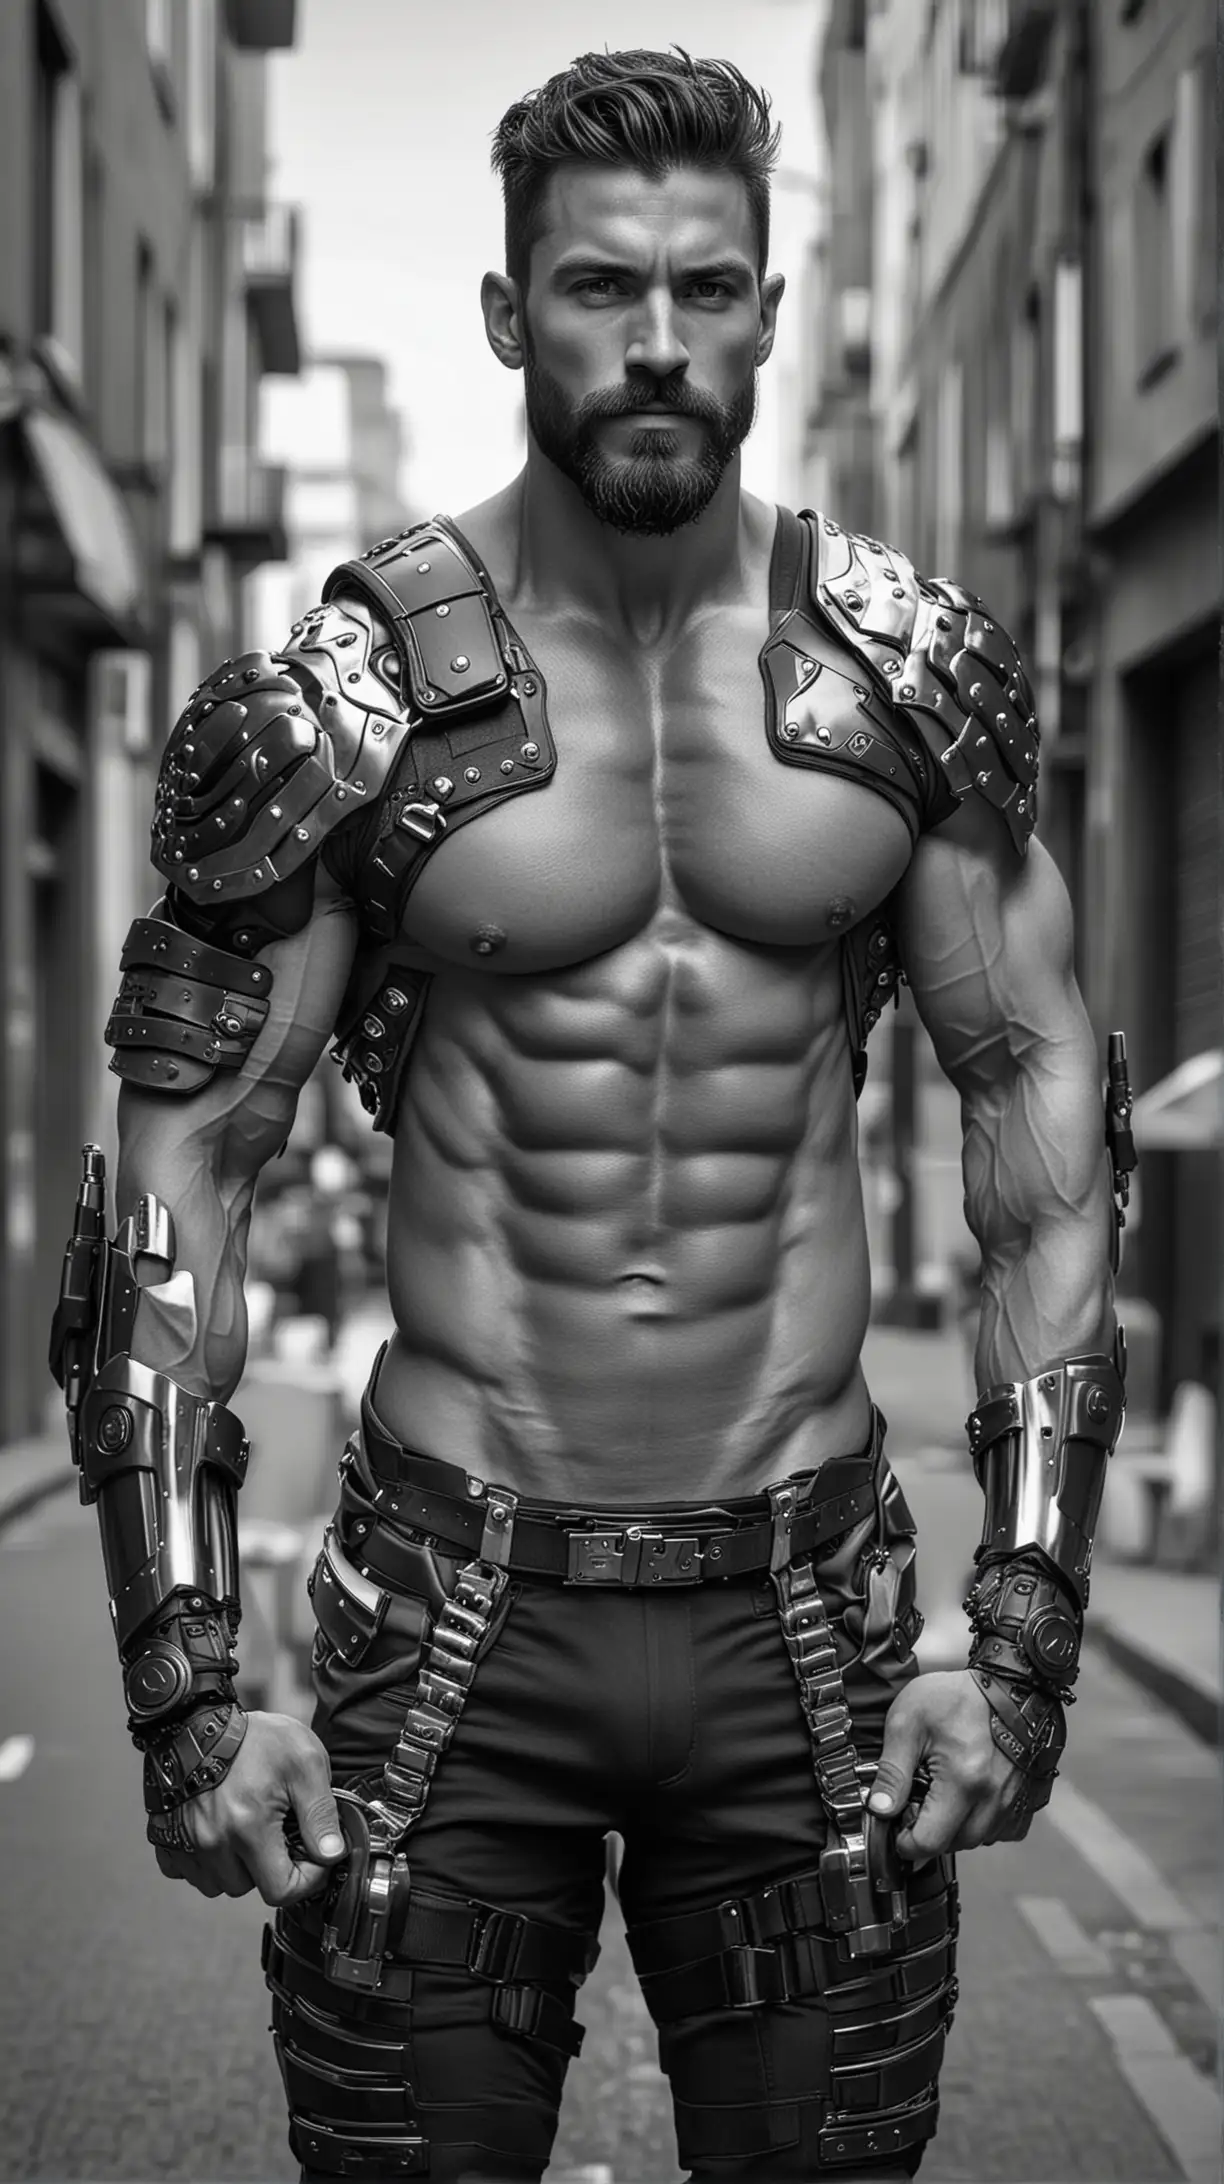 Tall and handsome half naked bodybuilder man with beautiful hairstyle and beard with attractive eyes and Big wide shoulder and chest in modern High tech black and white armour suit with firearms on hands walking on street showing his abs and muscles revealing under the armour